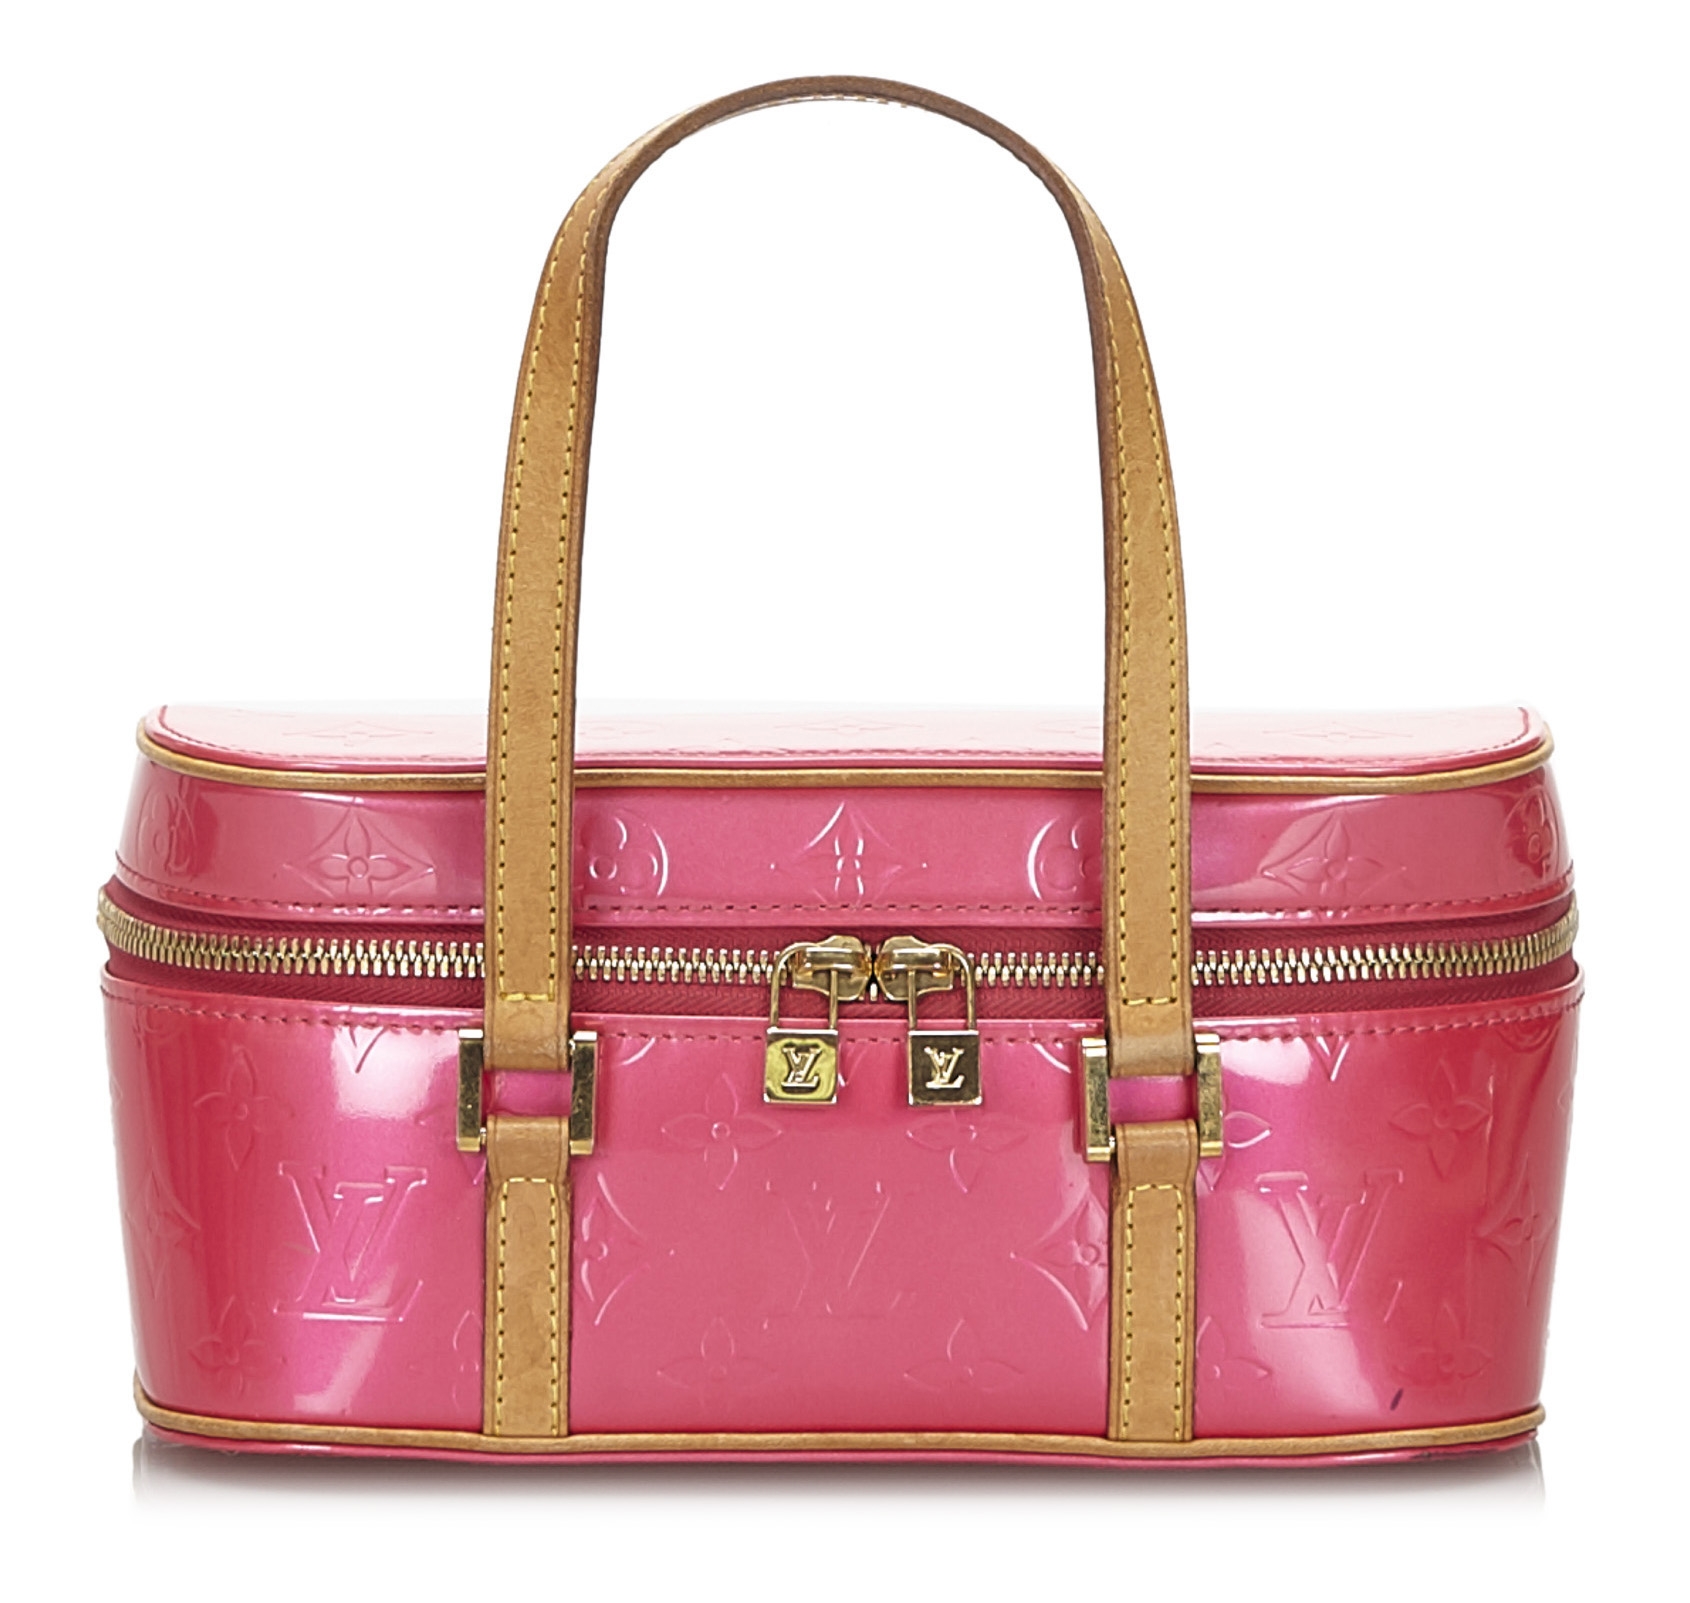 Louis Vuitton - Authenticated Blanche Handbag - Leather Pink Plain for Women, Very Good Condition